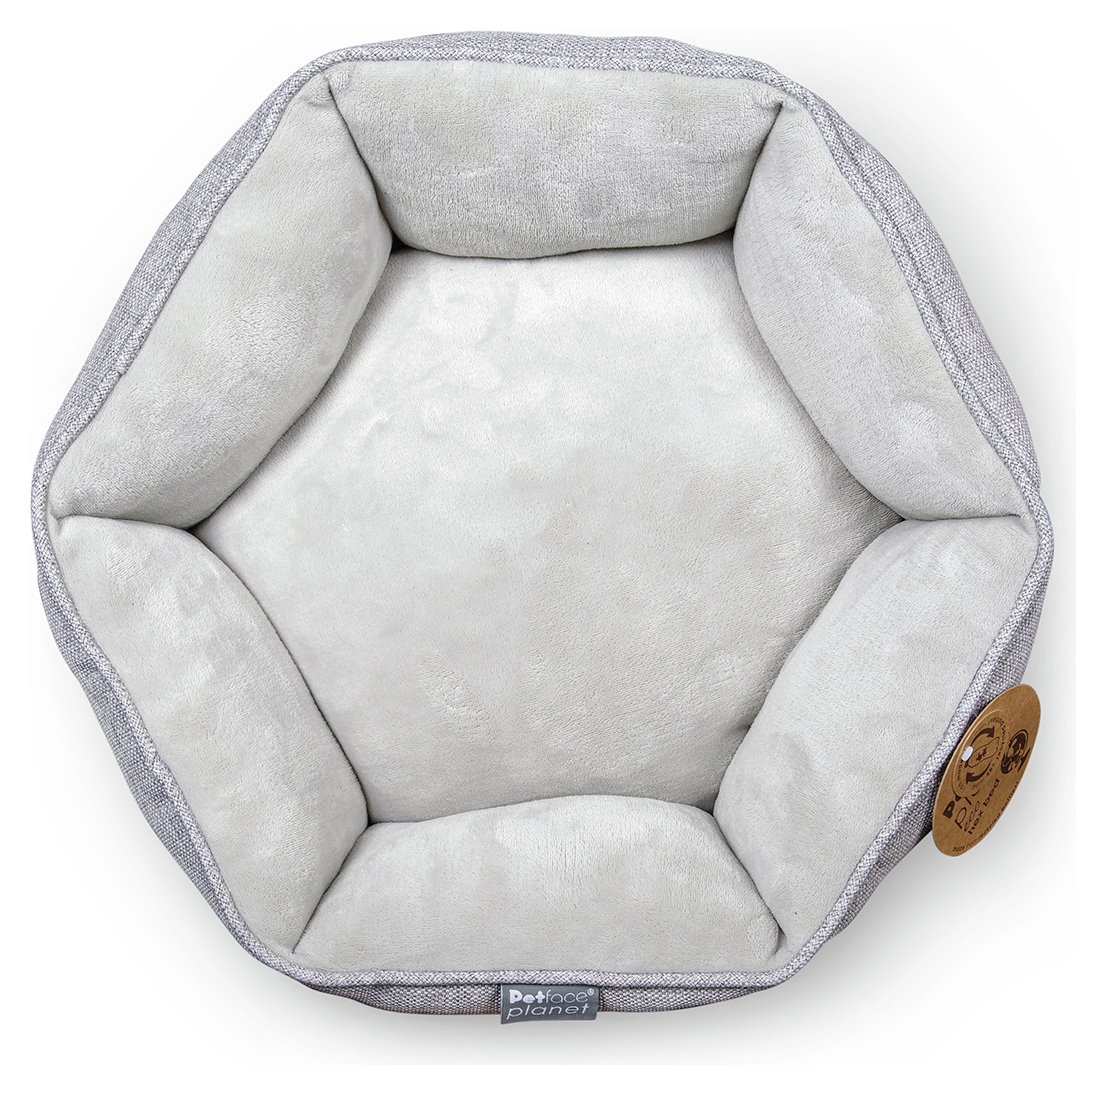 Petface Planet Grey Eco Pet Bed - Small